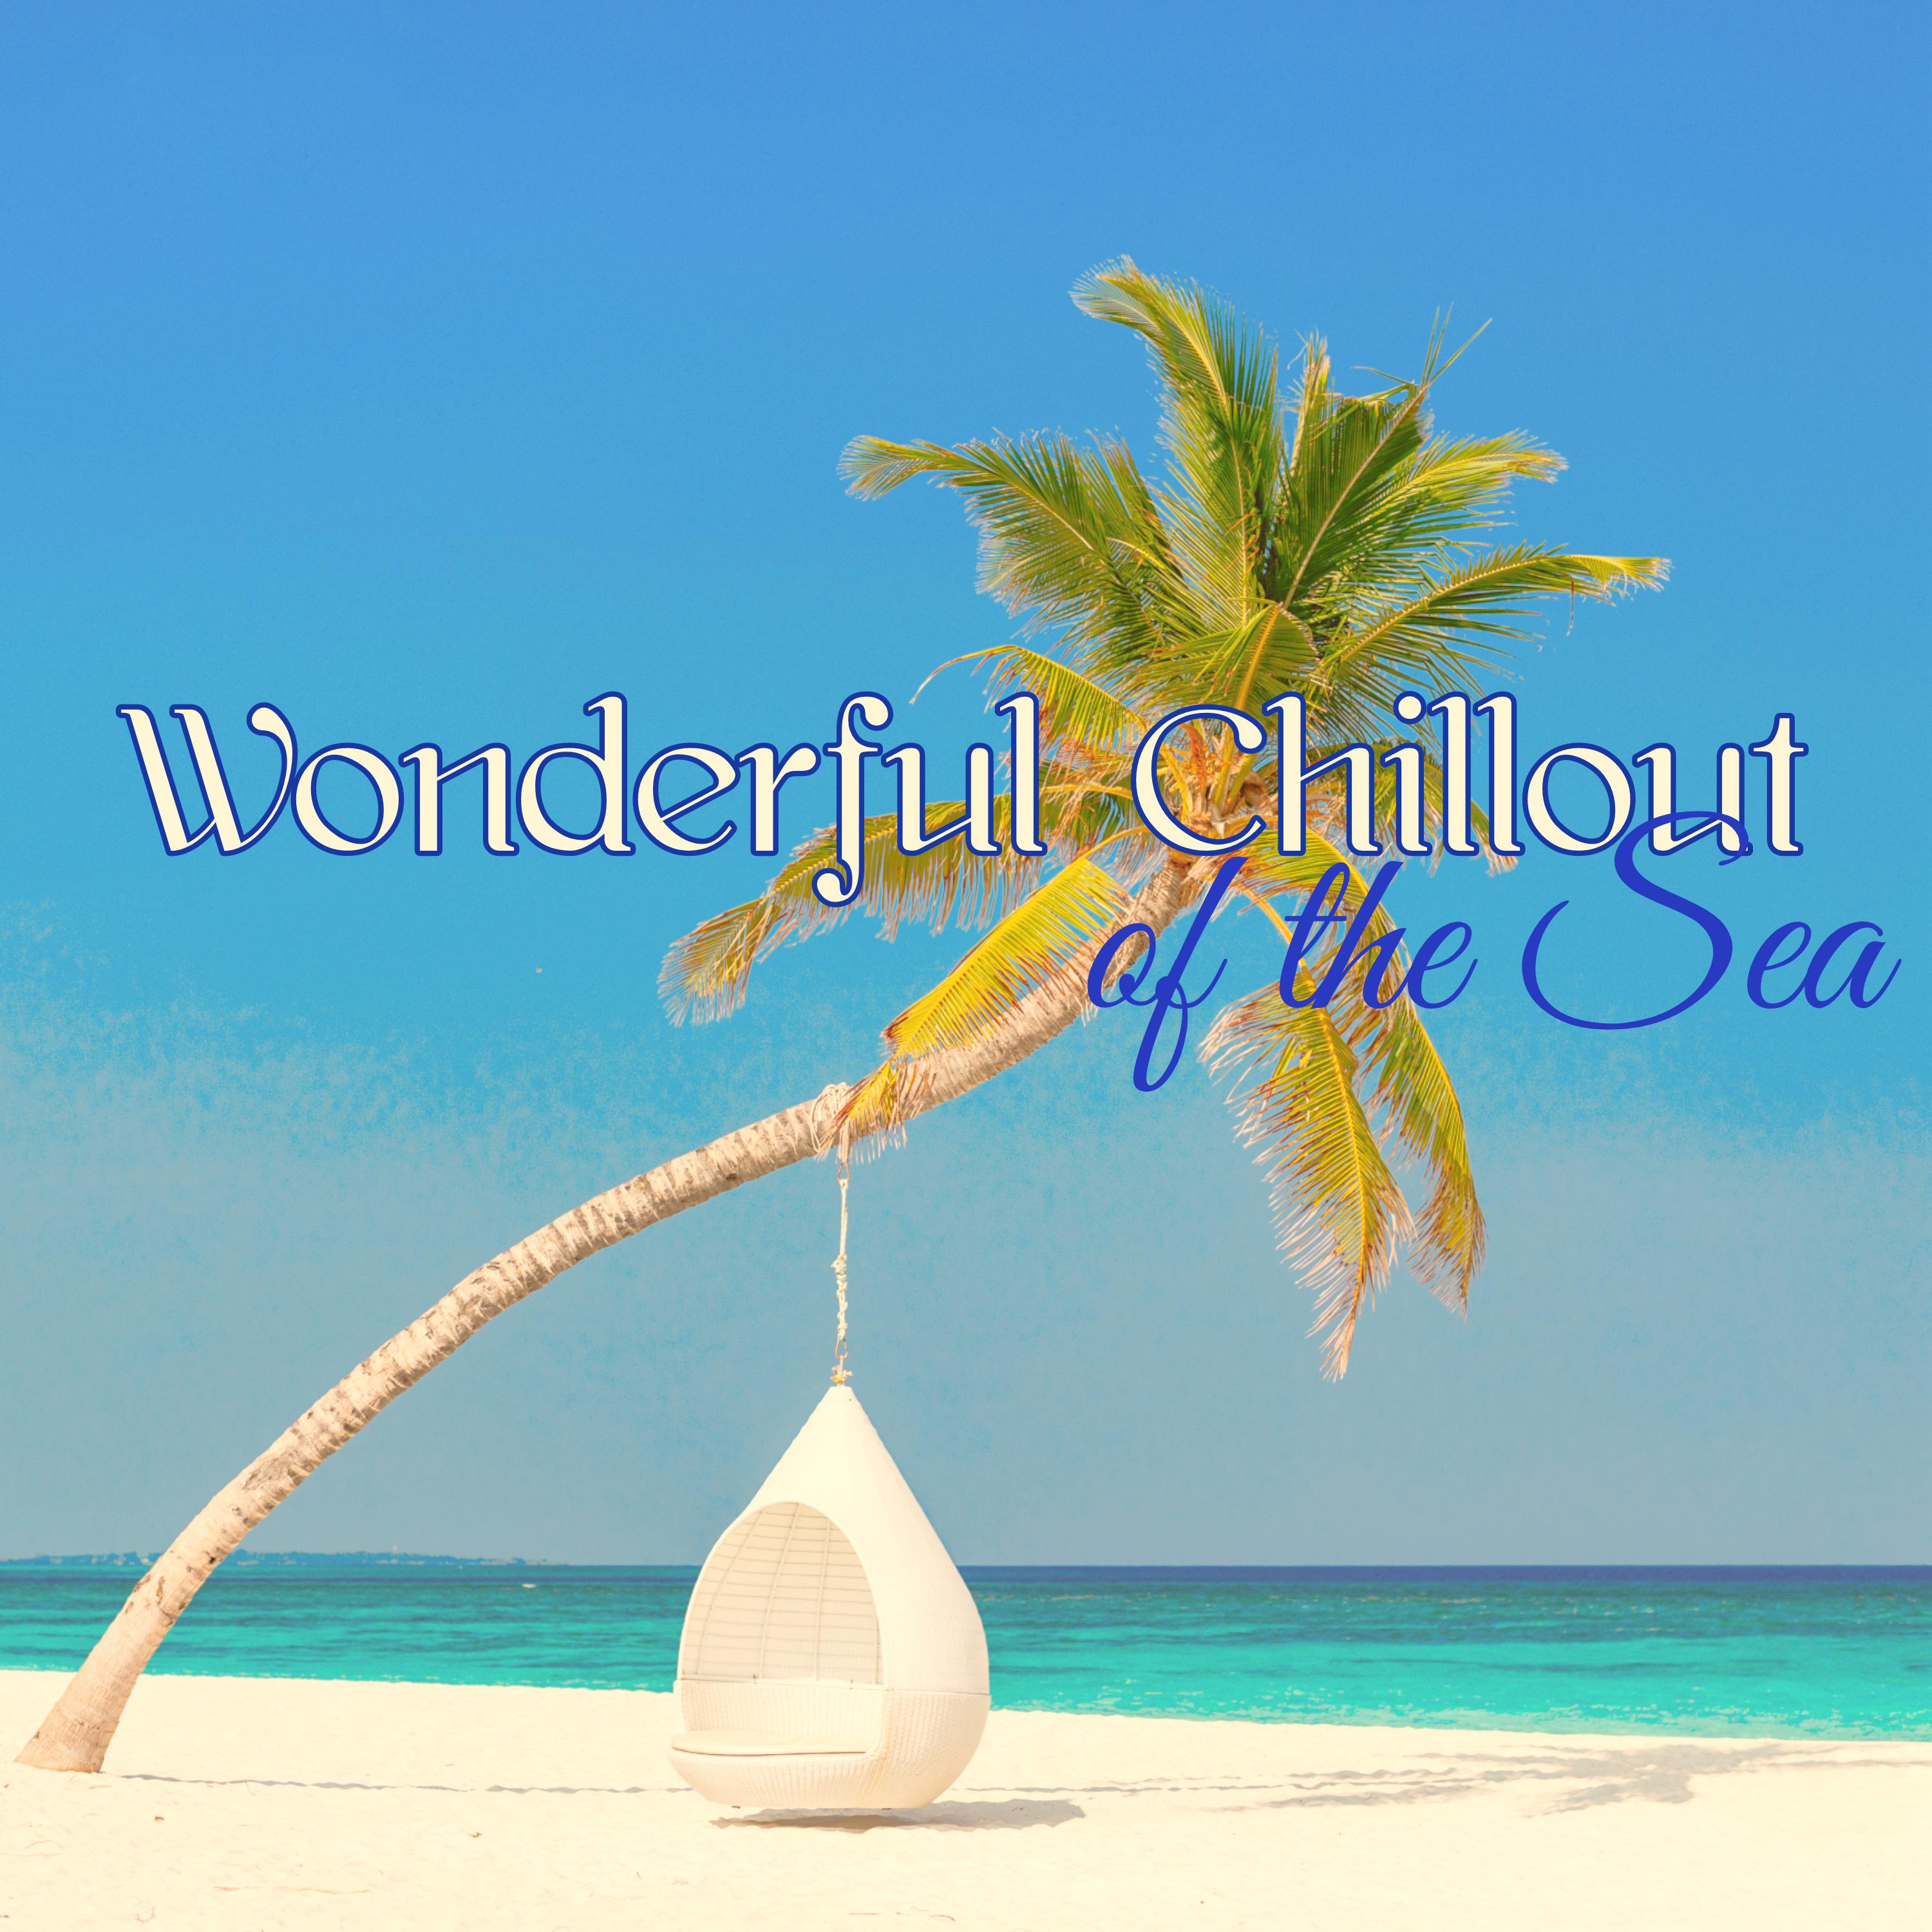 Wonderful Chillout of the Sea – Smooth & Caressing Chill Out by the Sea